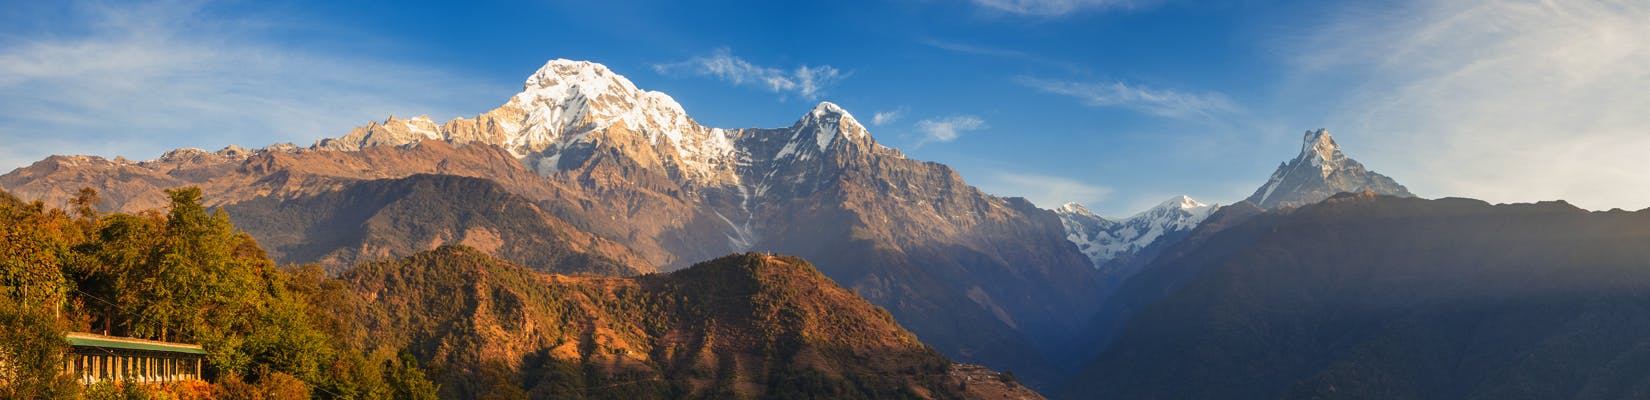 Ghorepani Poon Hill and Ghandruk Jeep Tour: Is it Possible from Kathmandu/Pokhara?